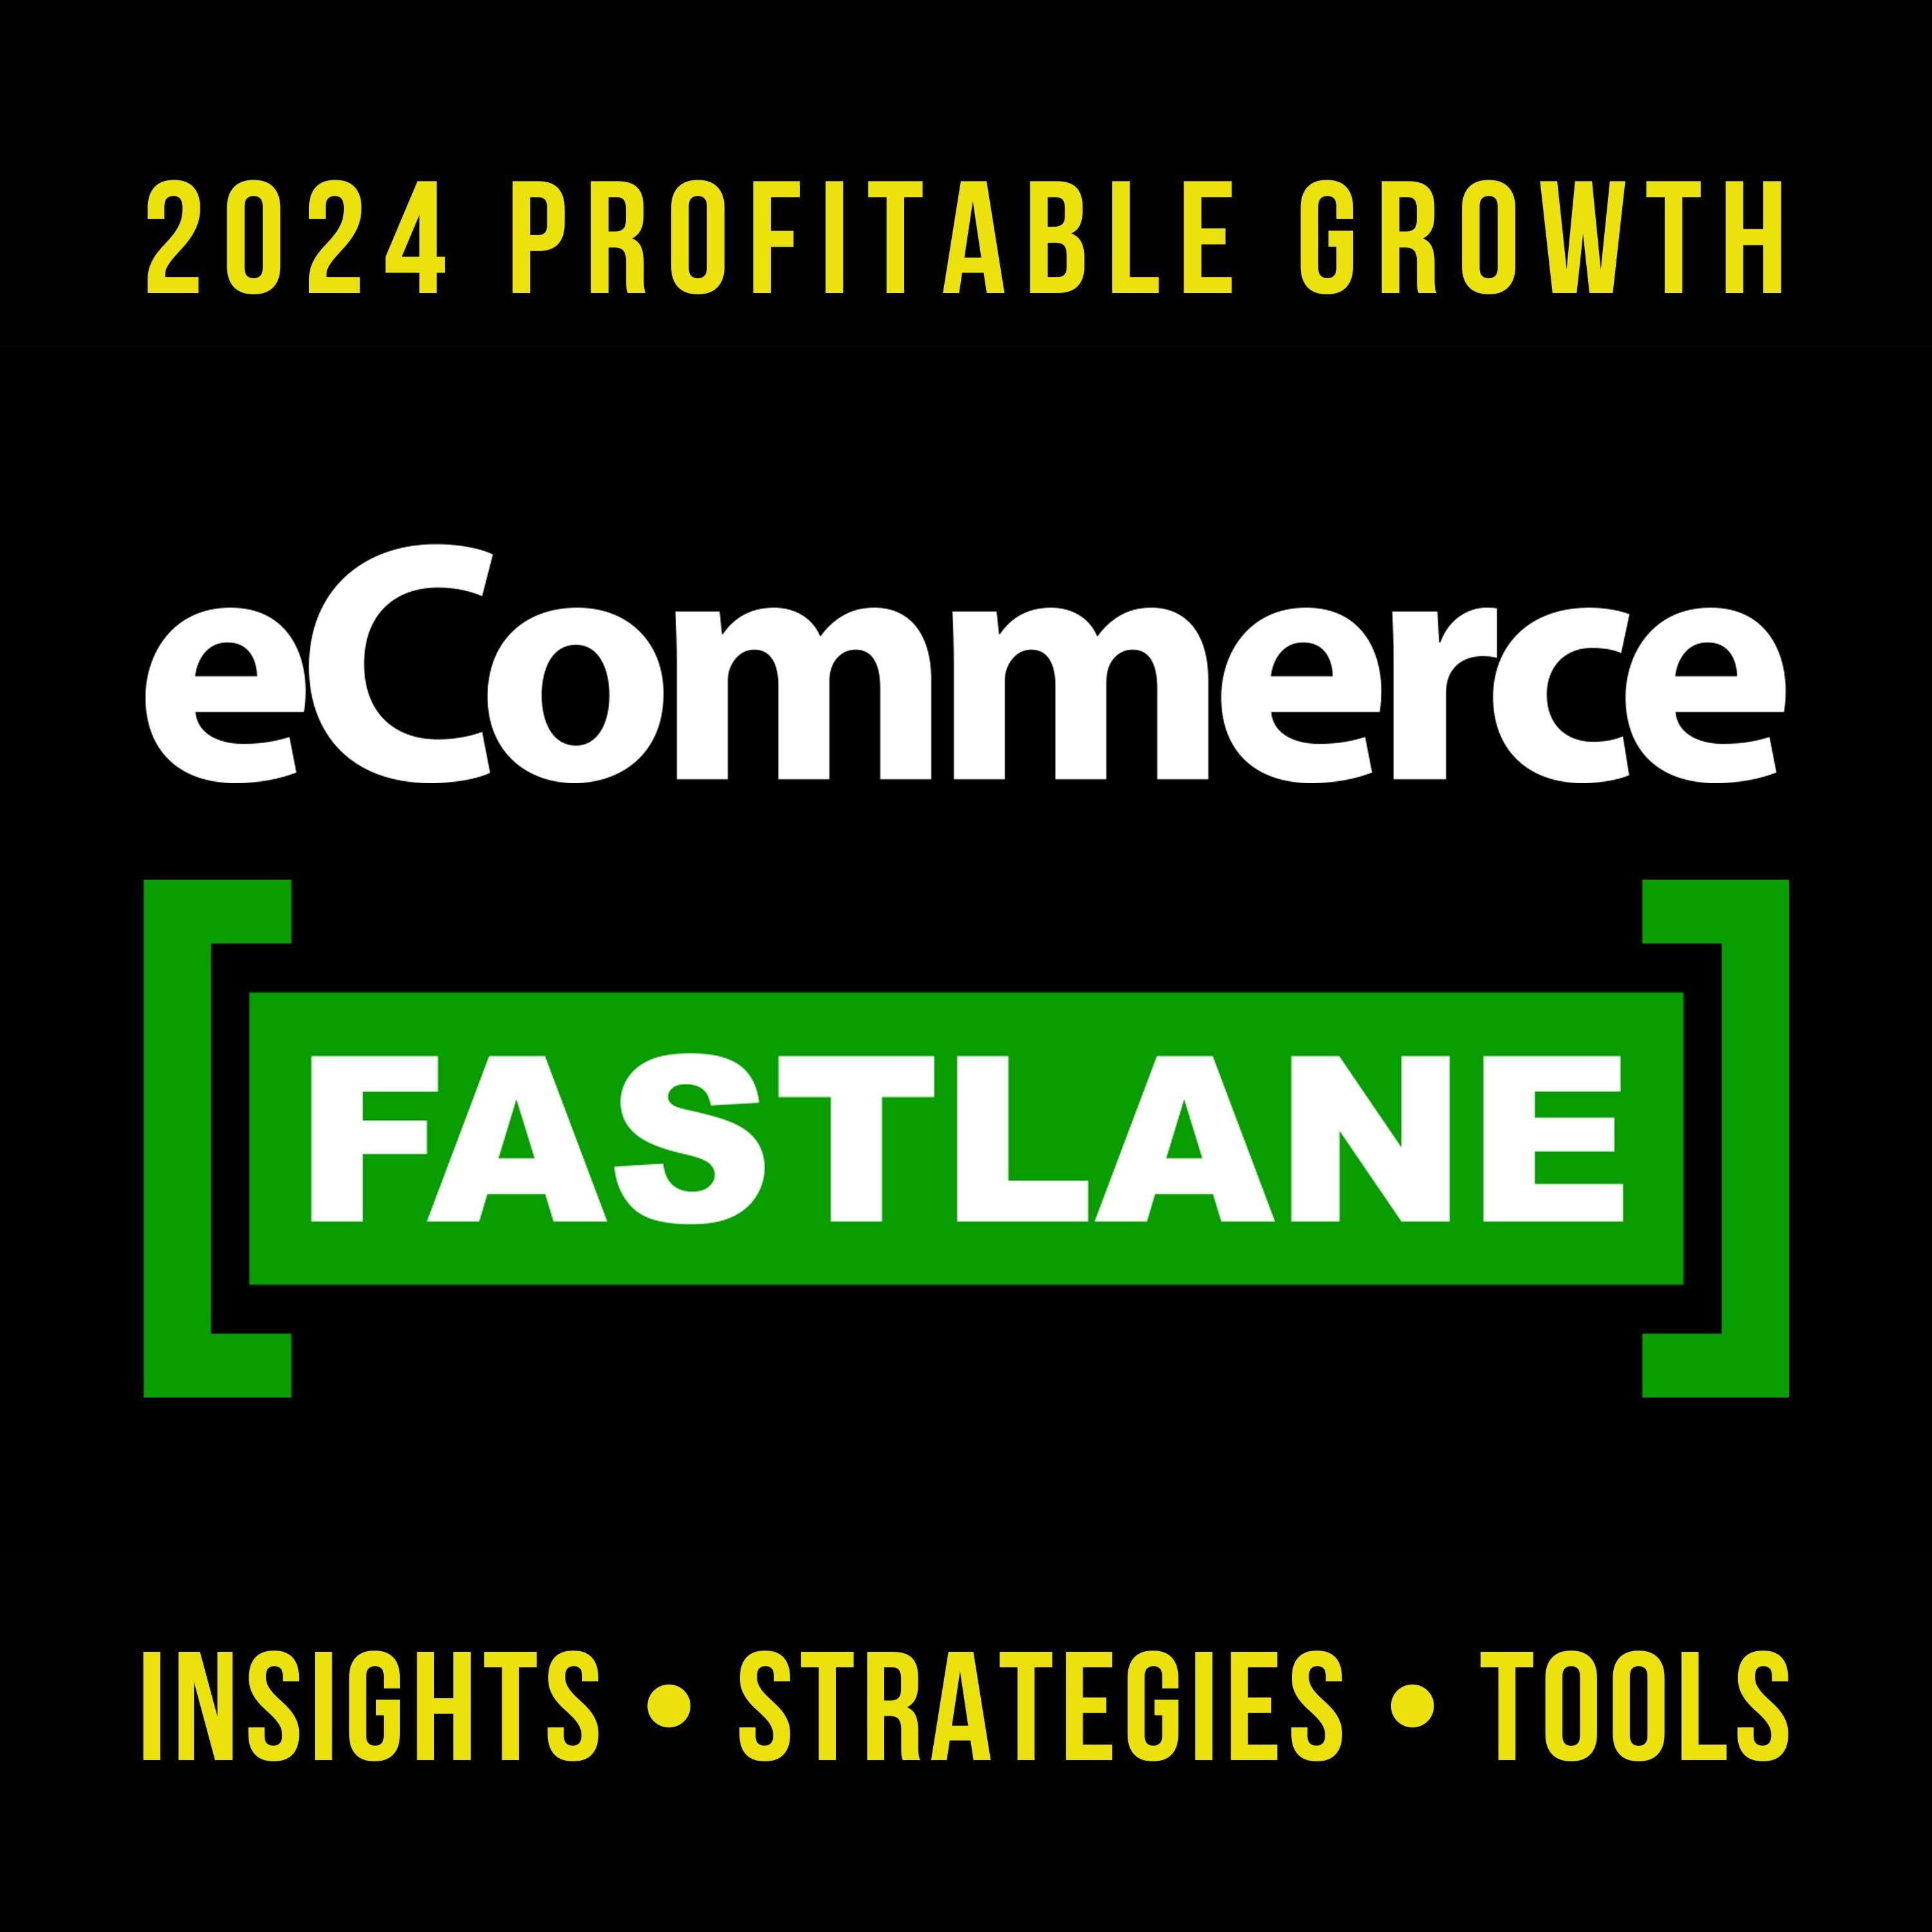 eCommerce Fastlane: Shopify Experts Share Strategies for Acquisition, Conversion, Retention | Grow Your Shopify Store with DTC Marketing Tips